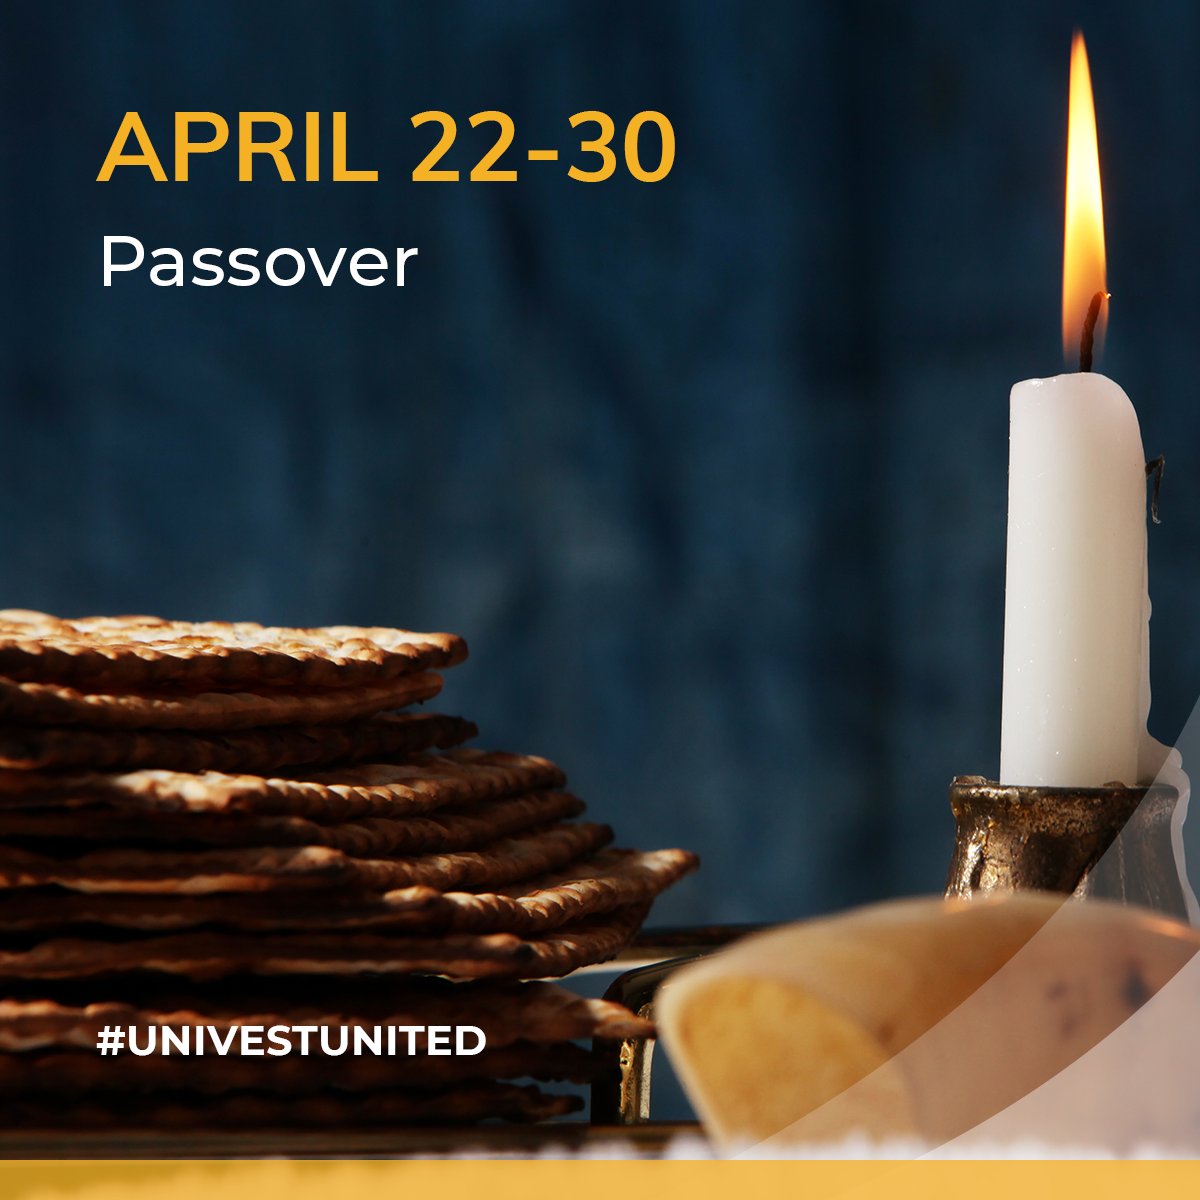 Tonight marks the beginning of Passover and we wish all who celebrate a kosher and joyous holiday. #UnivestUnited